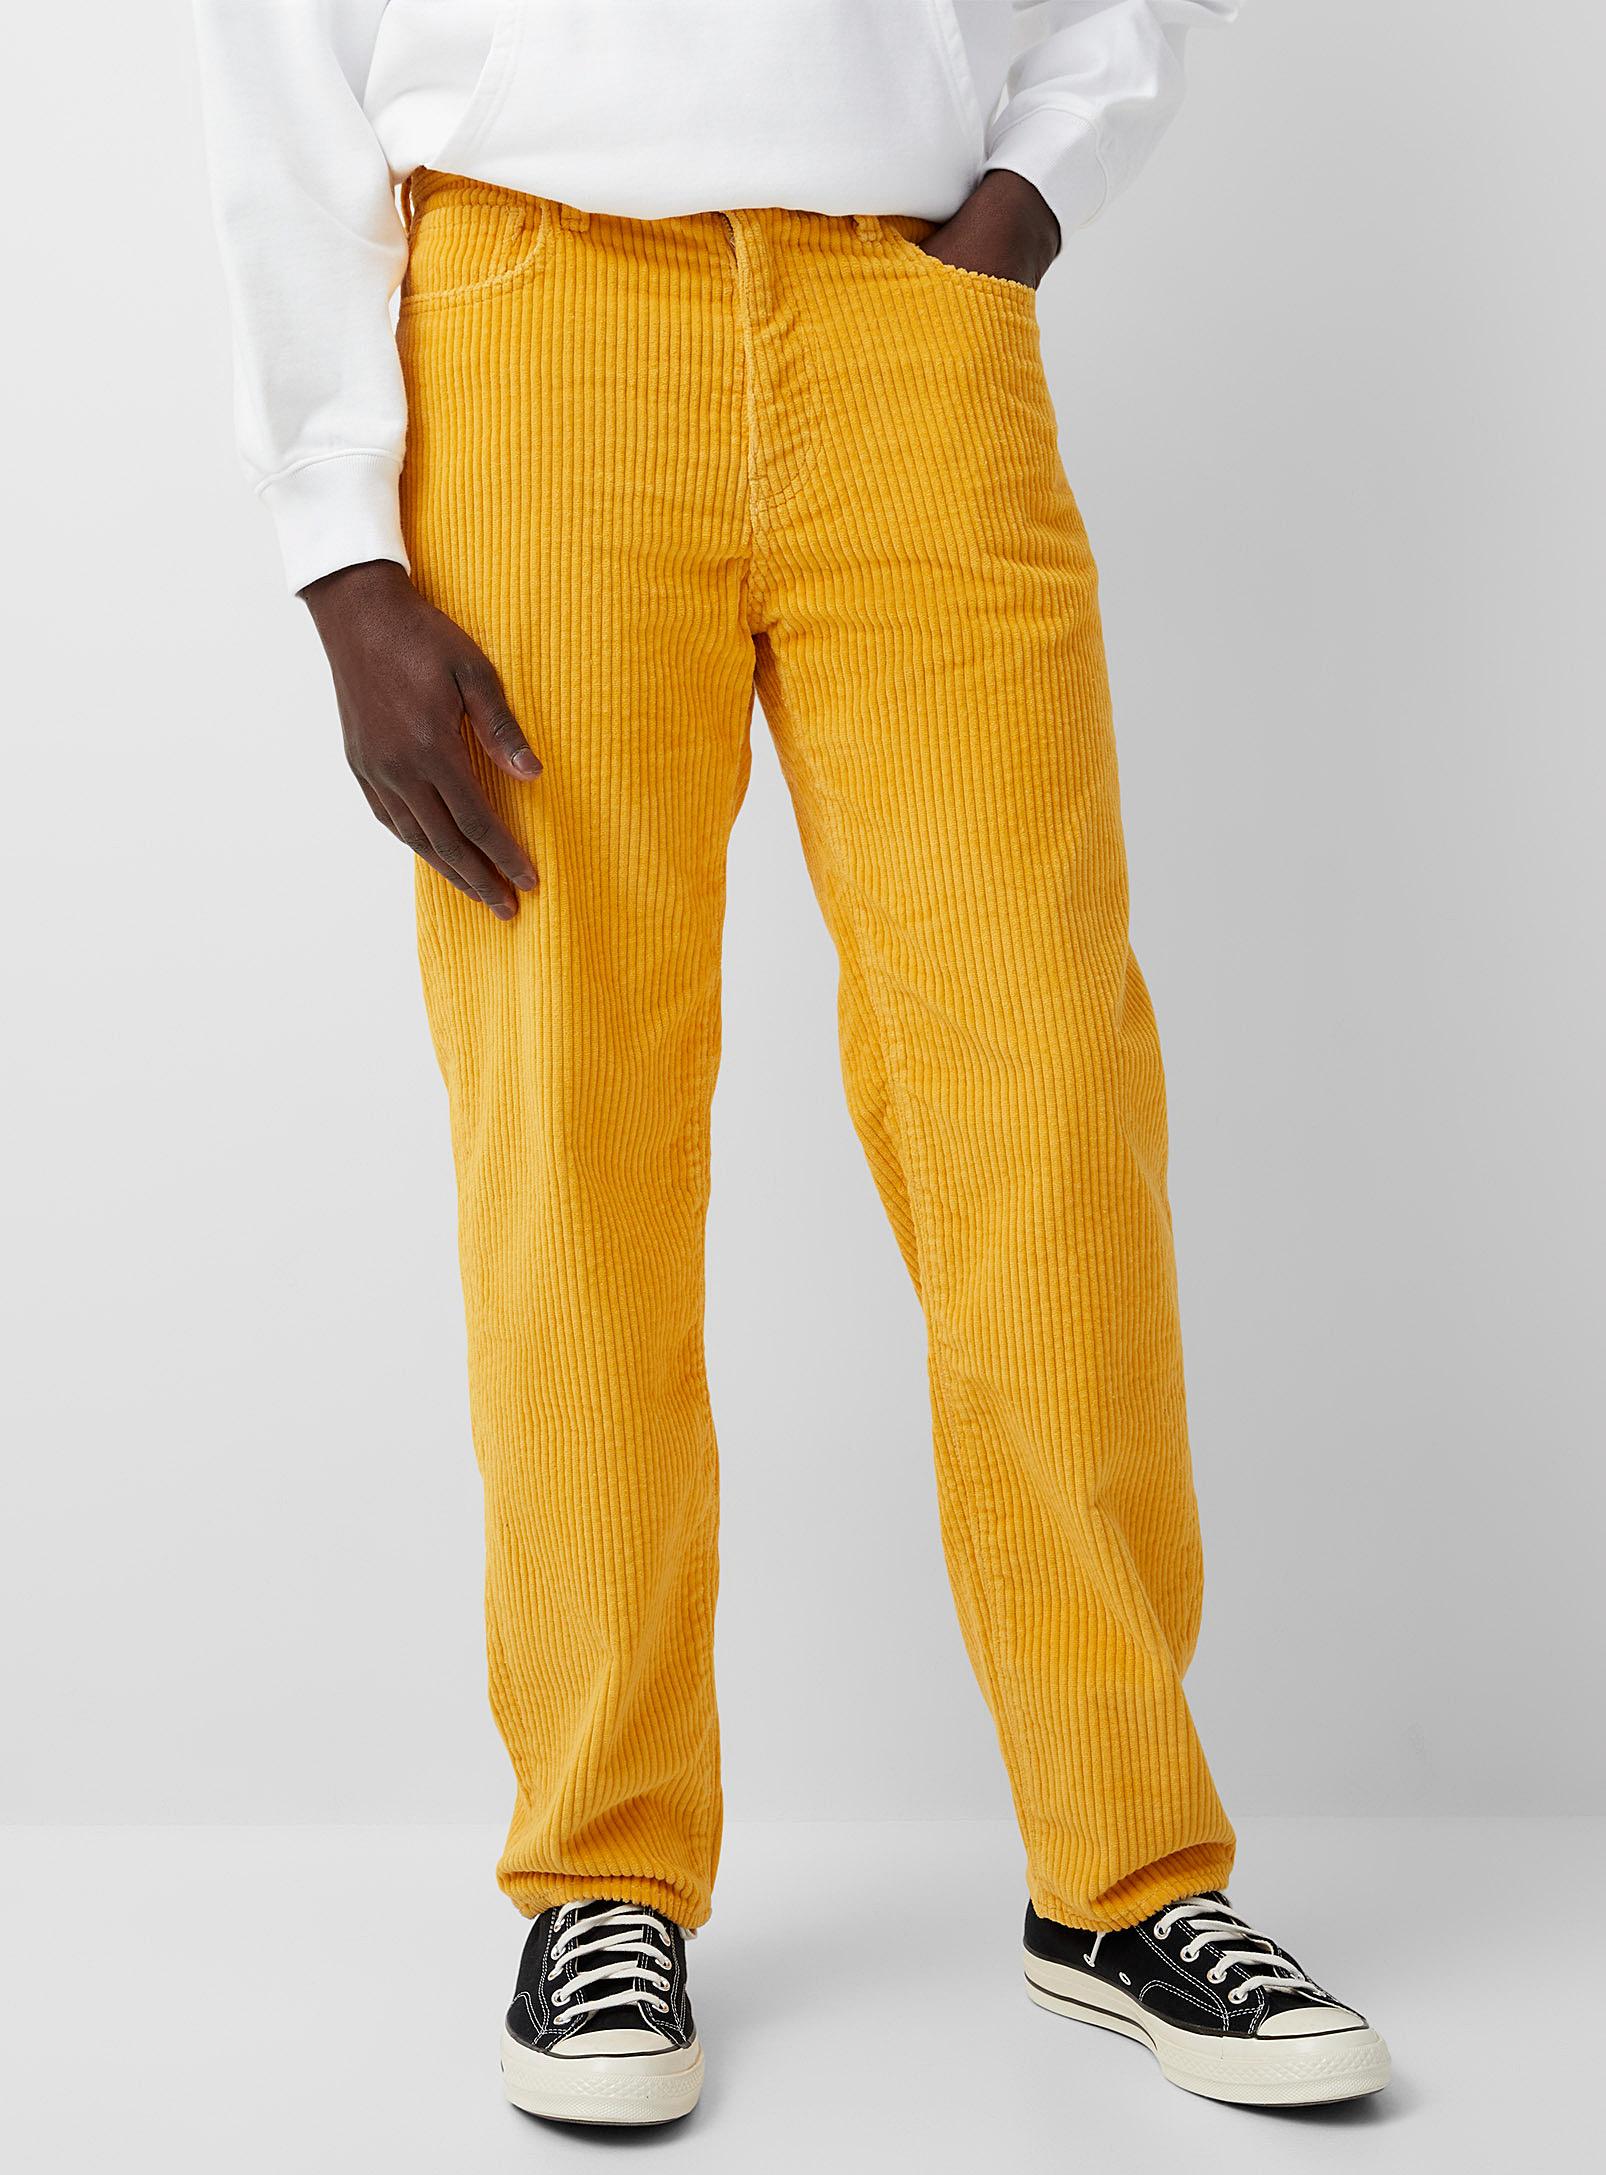 Levi's Simpson Yellow Corduroy Pant Straight Fit for Men | Lyst